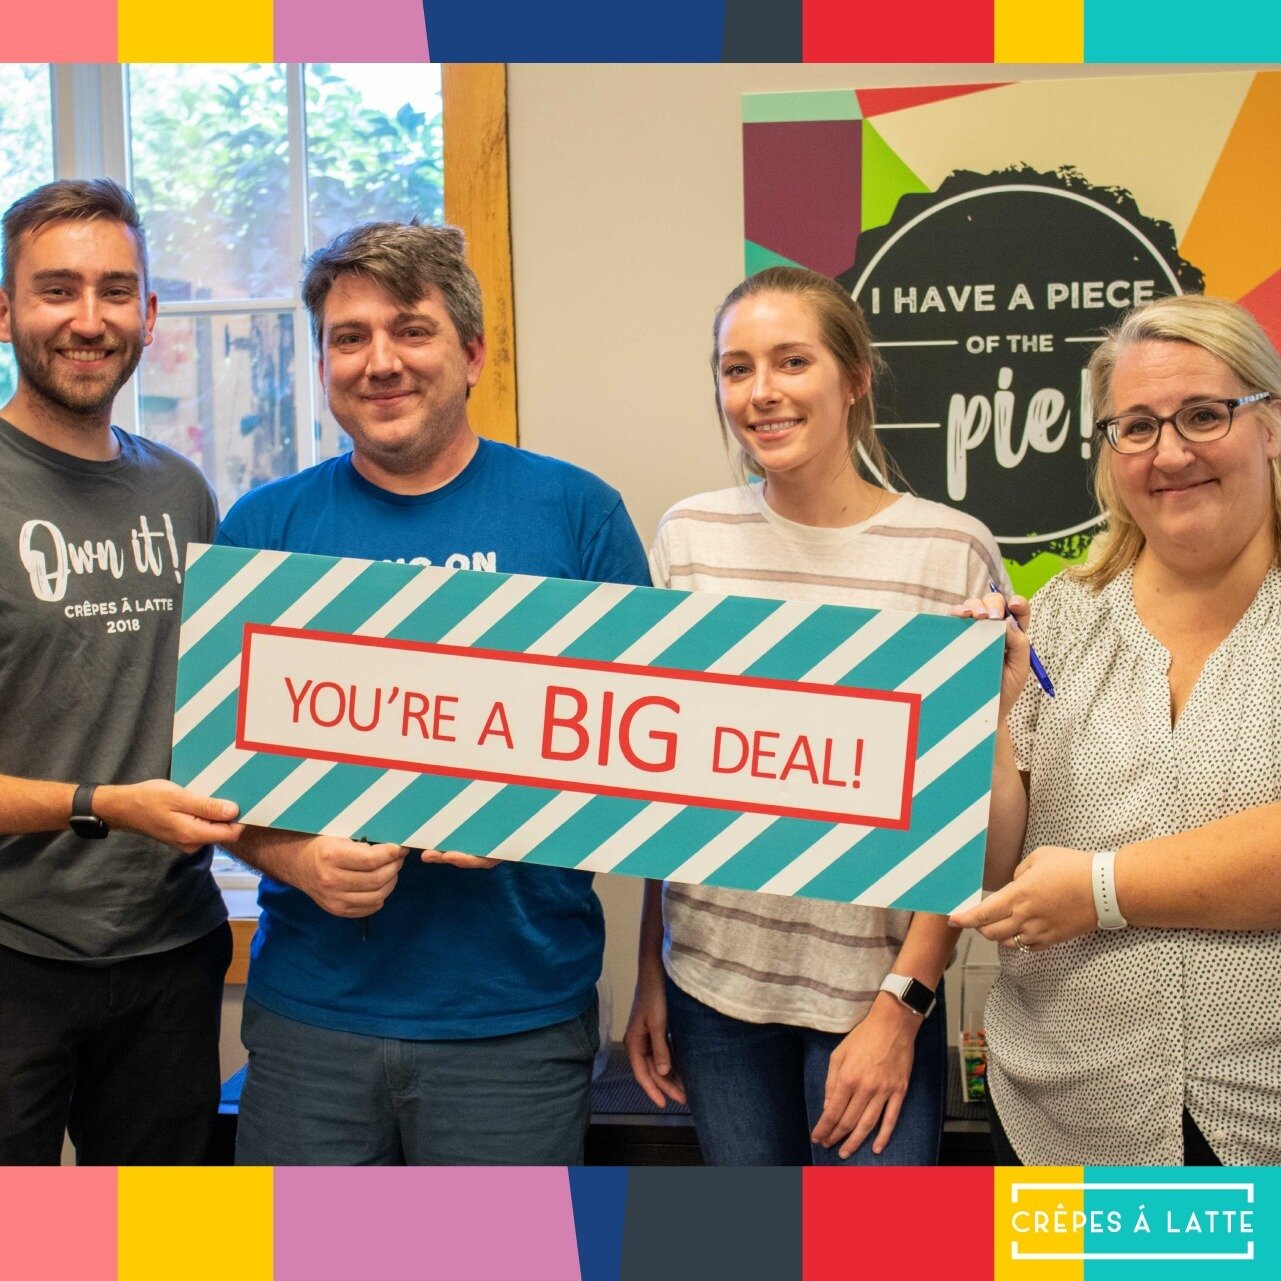 As our family grows, we bond by working closely together. The votes are in! Jerry, Jeff, Paige, and Laura your fellow colleagues voted and agree you are part of the glue that keeps everything going strong! #YoureABigDeal #bettertogether #teamapprecia